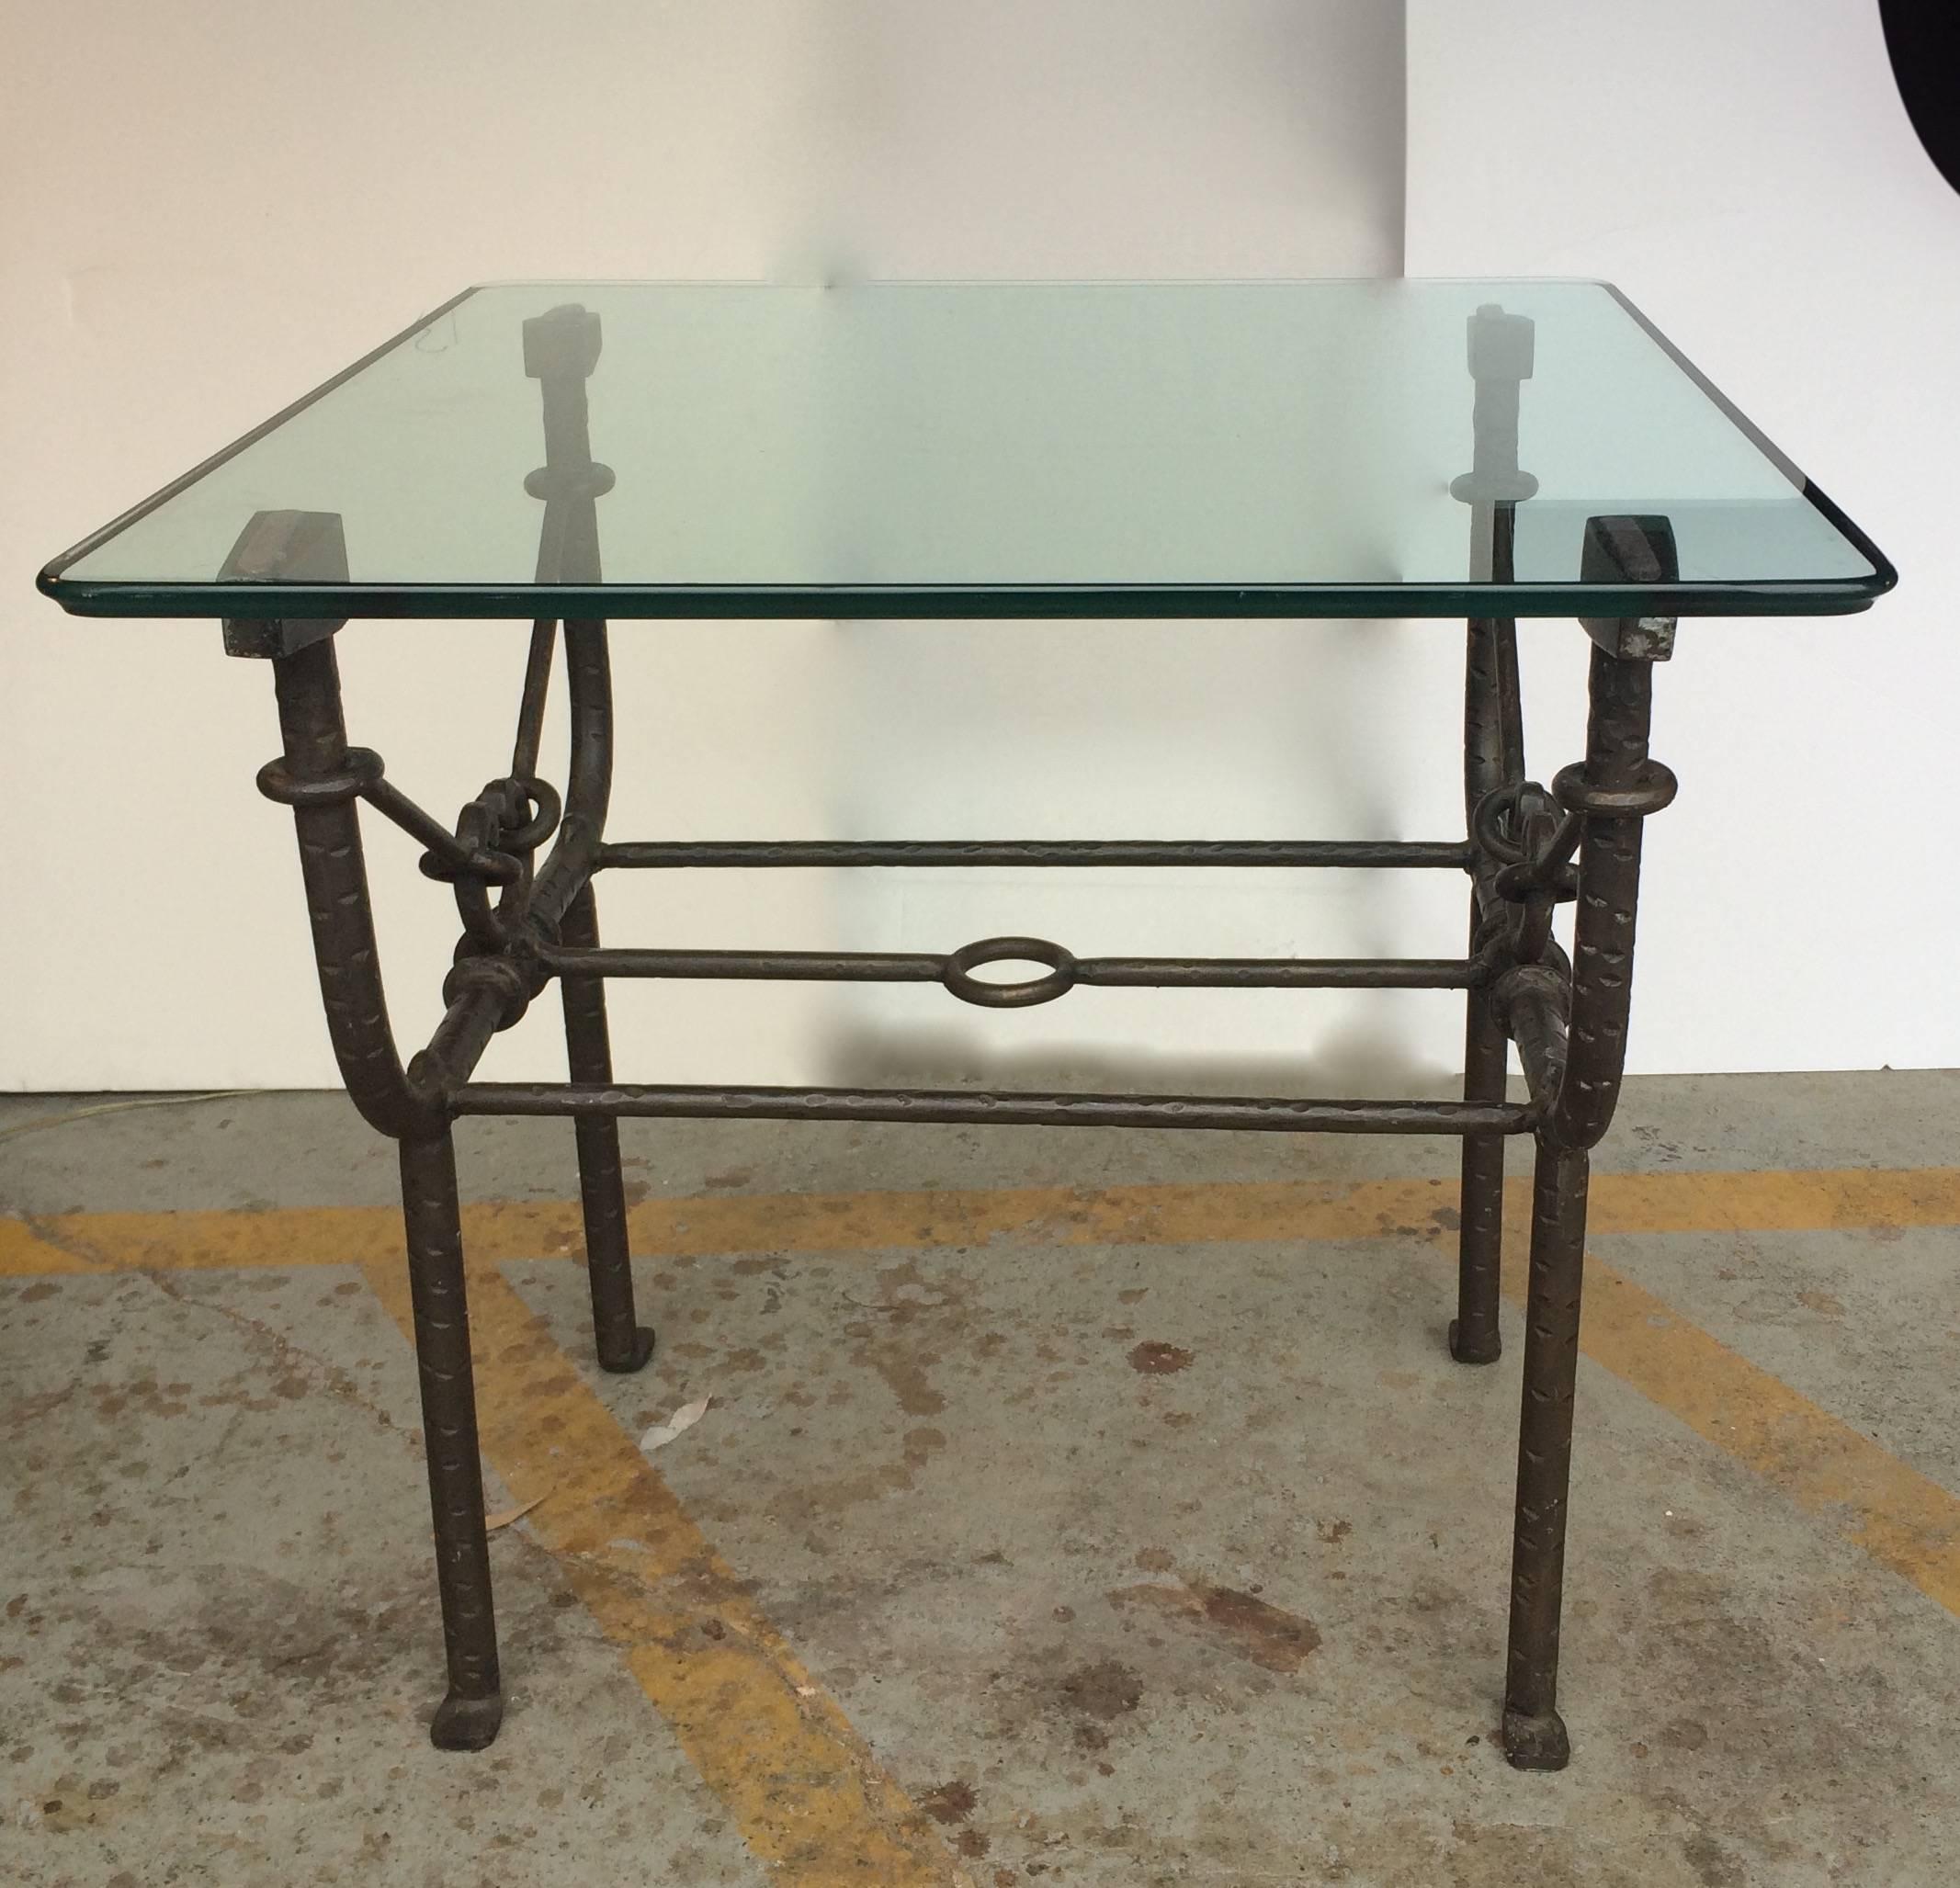 Side Table (After Diego Giacommetti)
circa 1980
Cast metal base, bevelled glass top
Approx 28 x 28 x 28 inches
Excellent condition